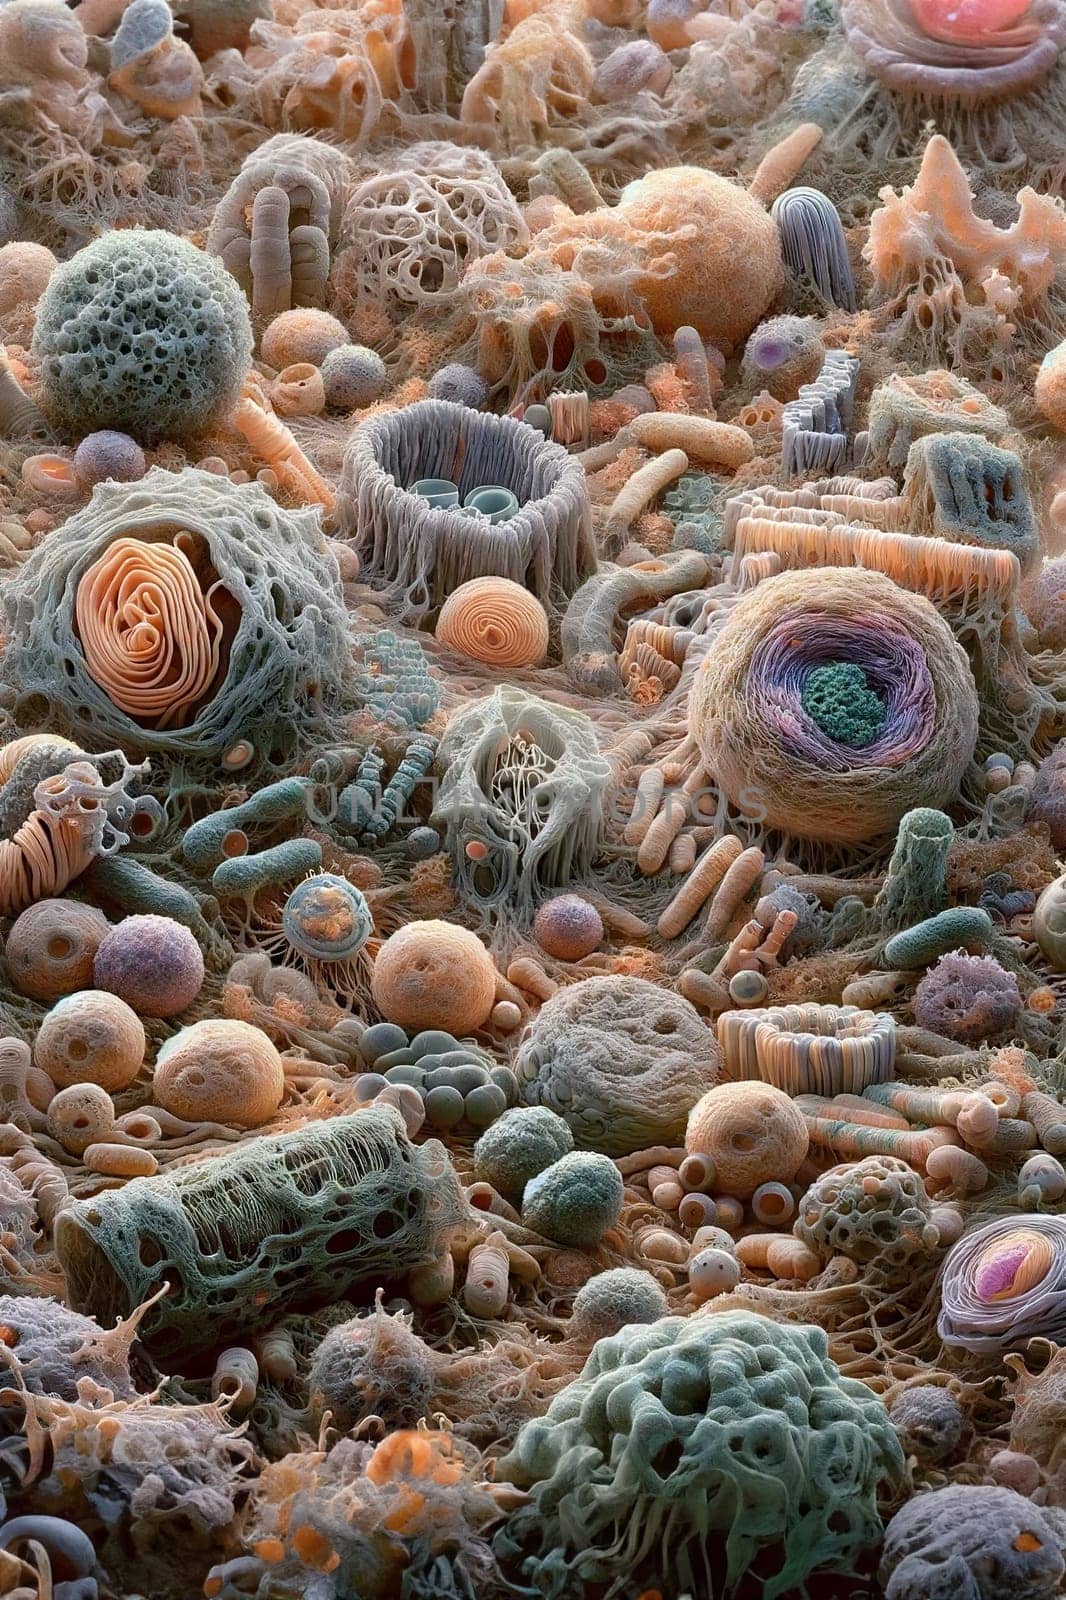 An intricate, highly-detailed portrayal of cells and tissue, revealing the mesmerizing complexity and structures within the biological world, AI-generated